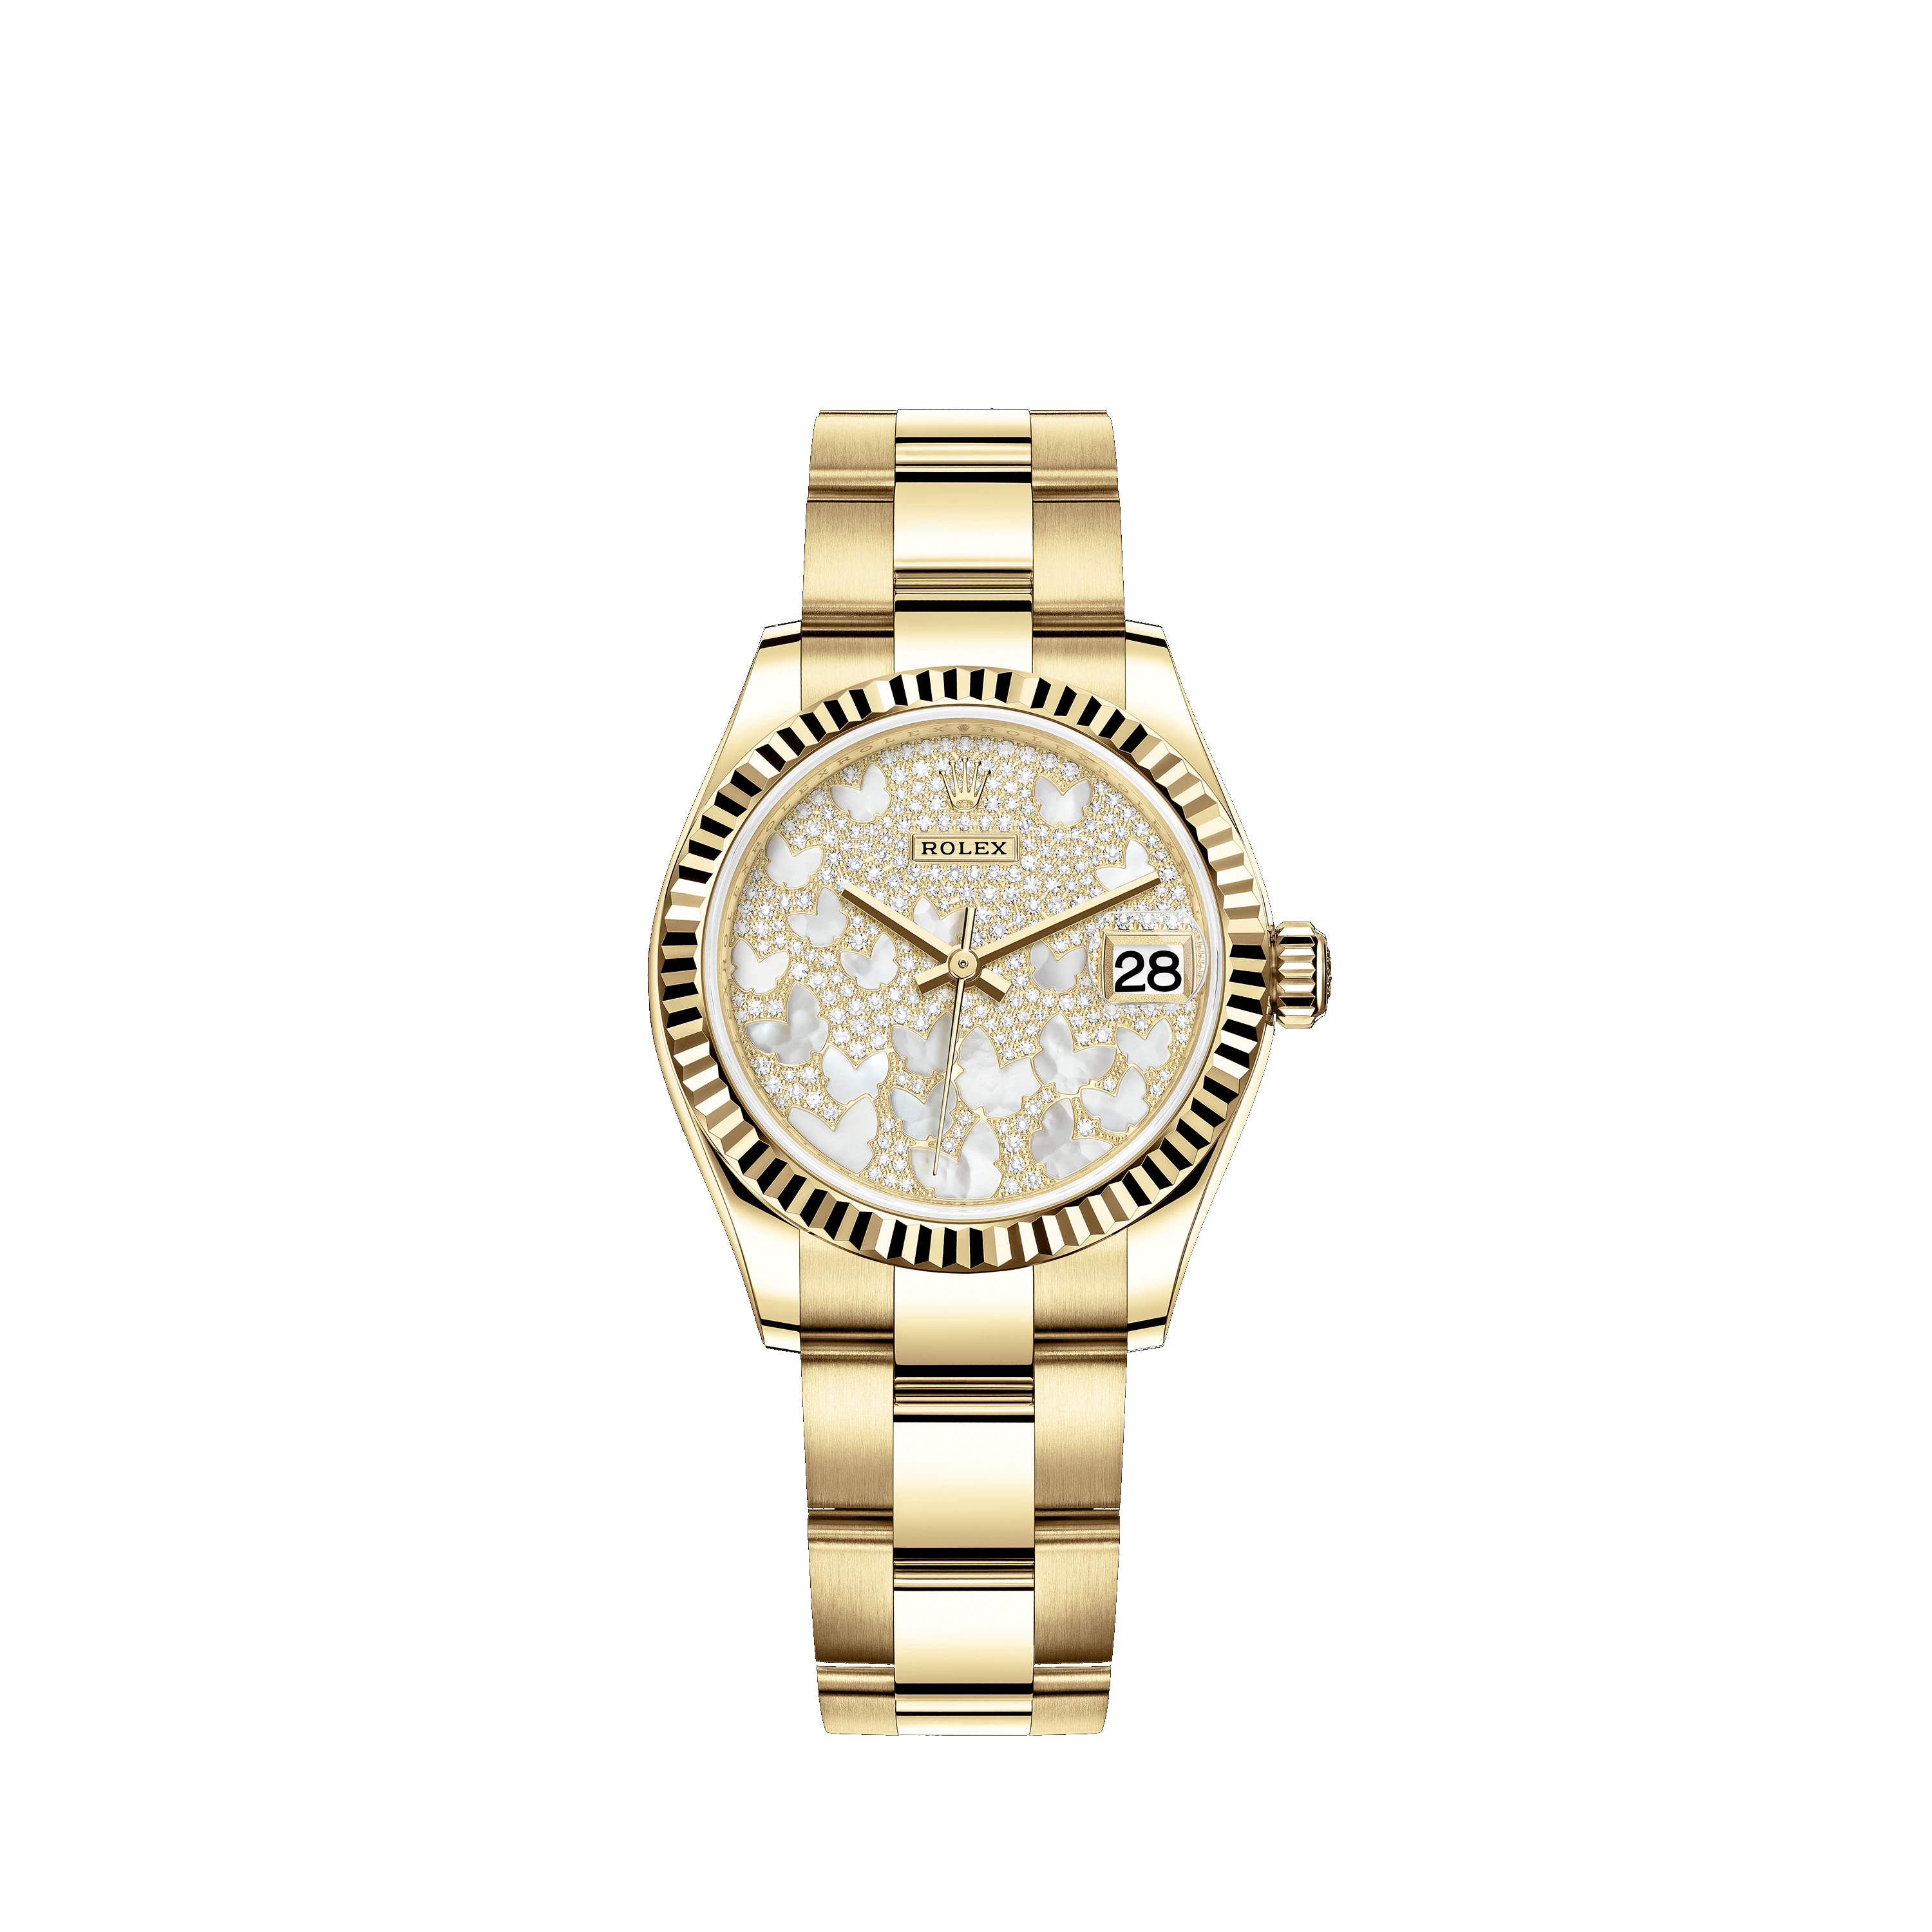 Datejust 31 278278 Gold Watch (Paved, Mother-of-Pearl Butterfly)